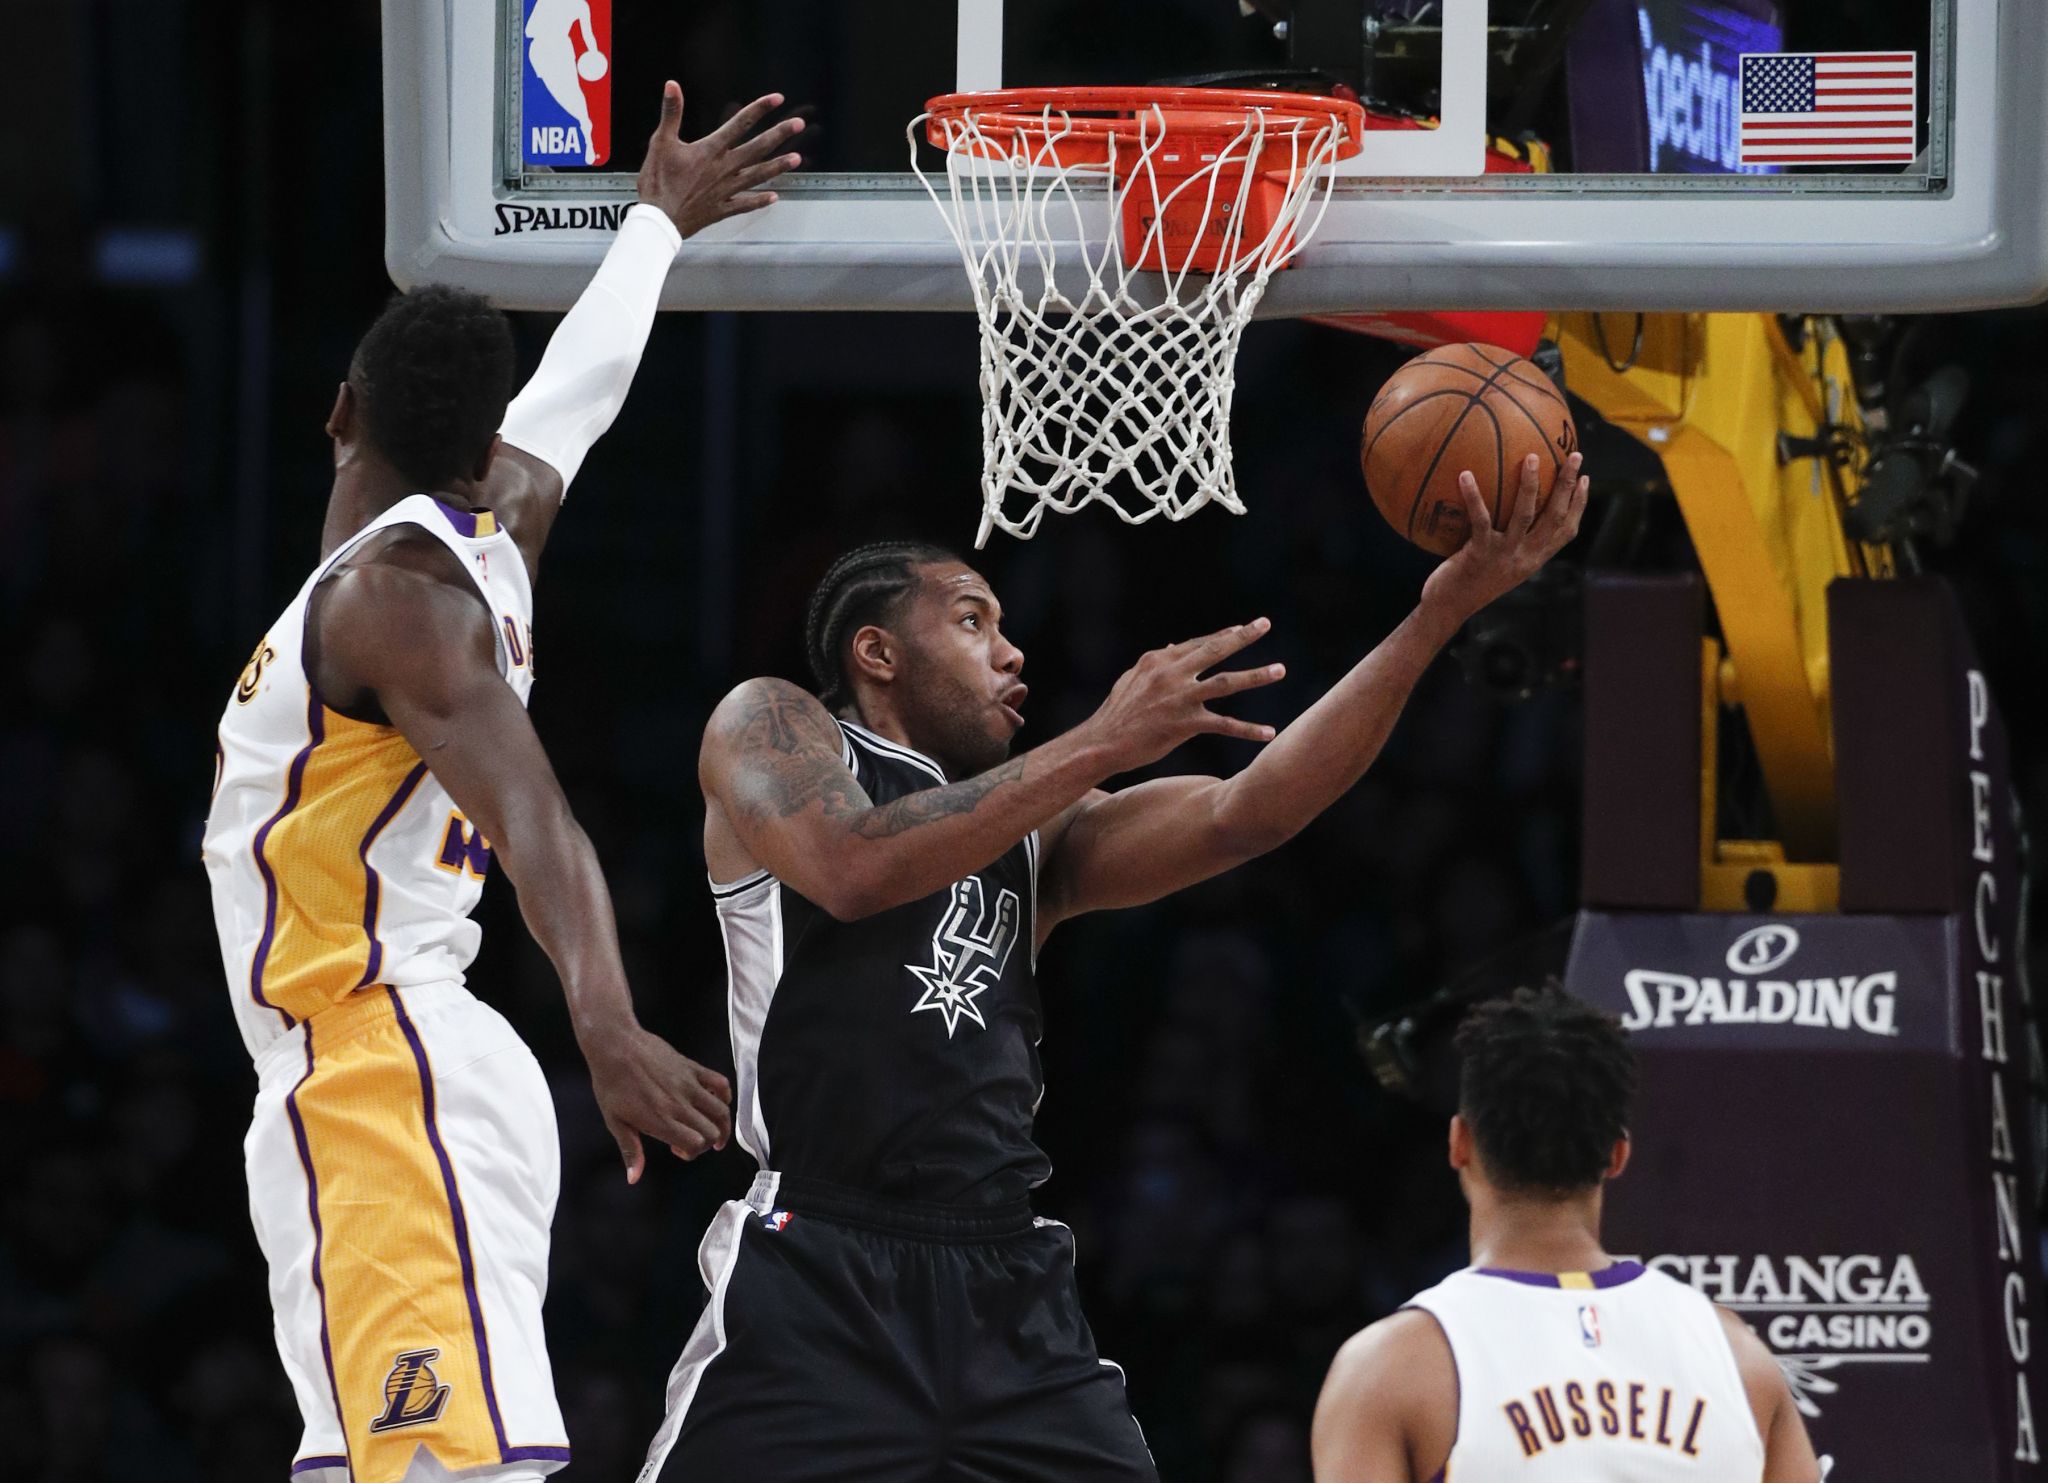 Spurs rout Lakers to finish off another successful rodeo trip - mySanAntonio.com